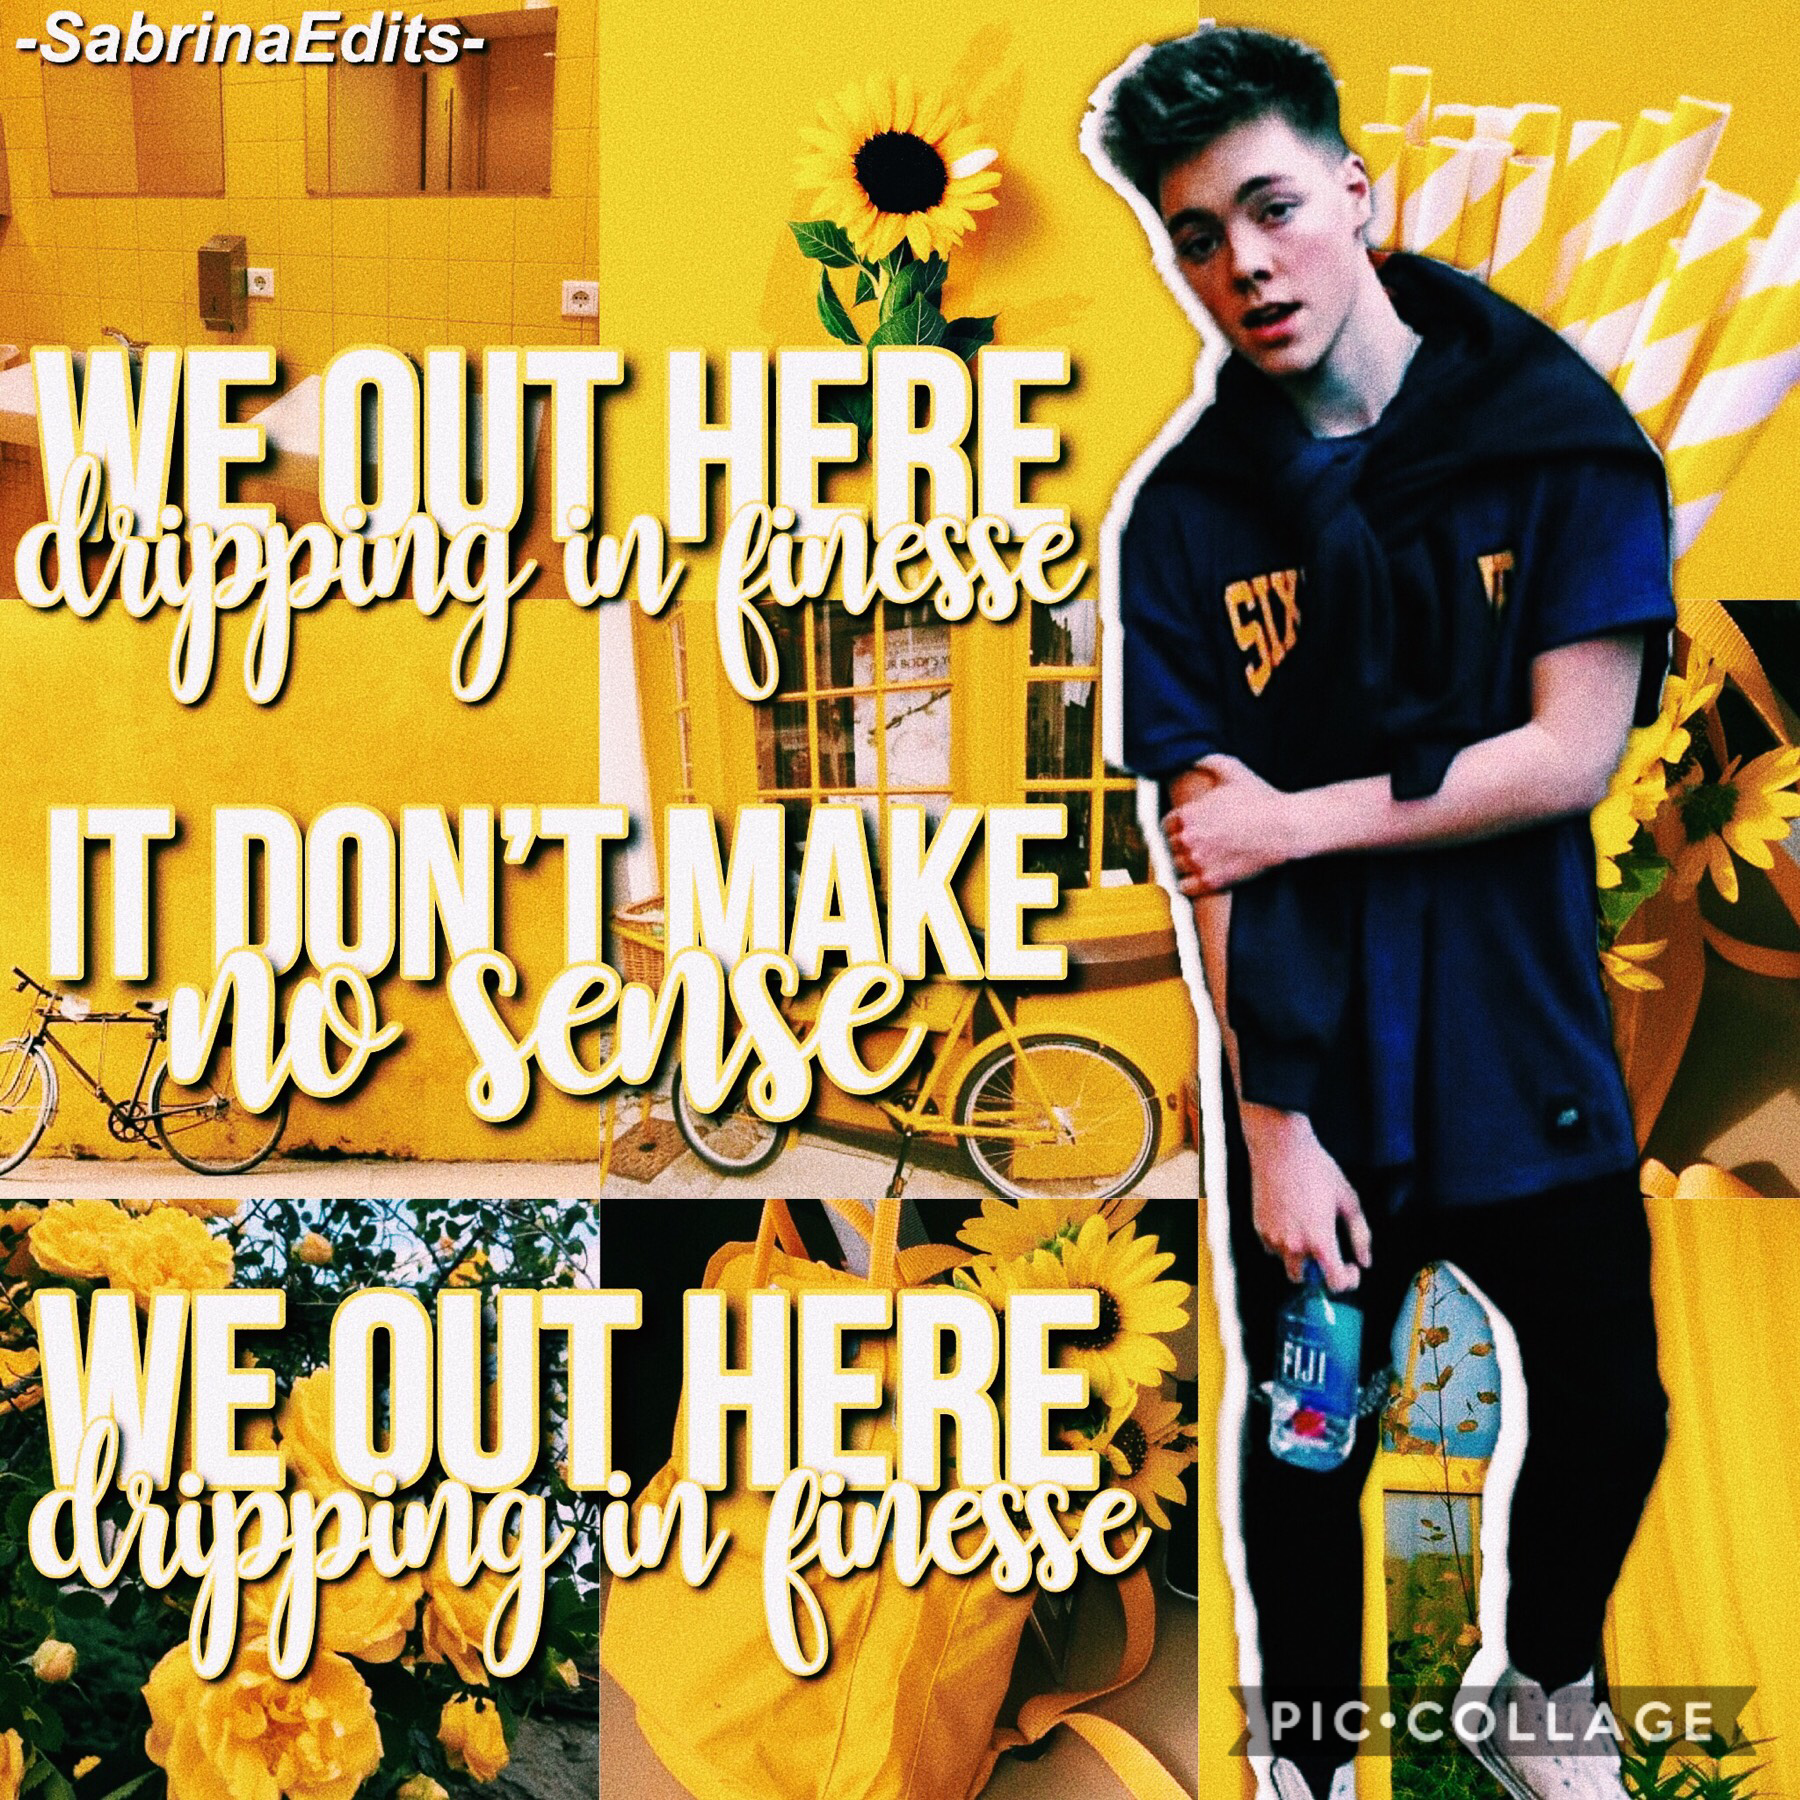 🌼 TAP HERE 🌼
Happy Friday Guys! i hope you like this edit, and if you do let me know in the comments! 

I love you guys so much!
Thanks for almost 8K 💛